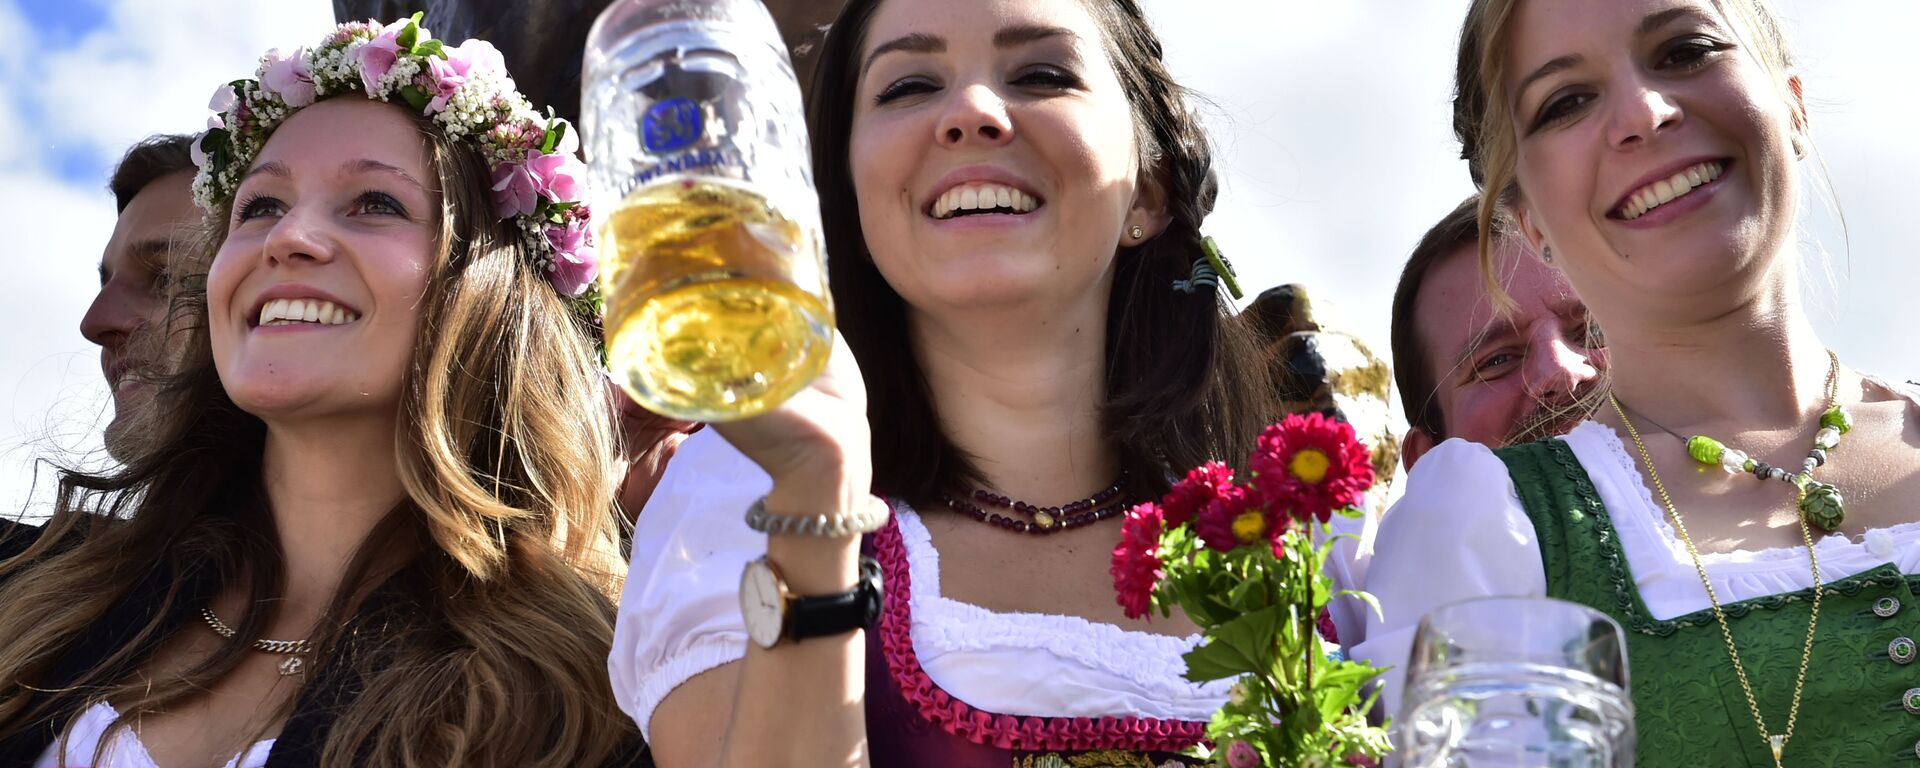 Young women celebrate the opening of the 182. Oktoberfest beer festival in Munich, southern Germany, Saturday, Sept. 19, 2015 - Sputnik International, 1920, 29.07.2022